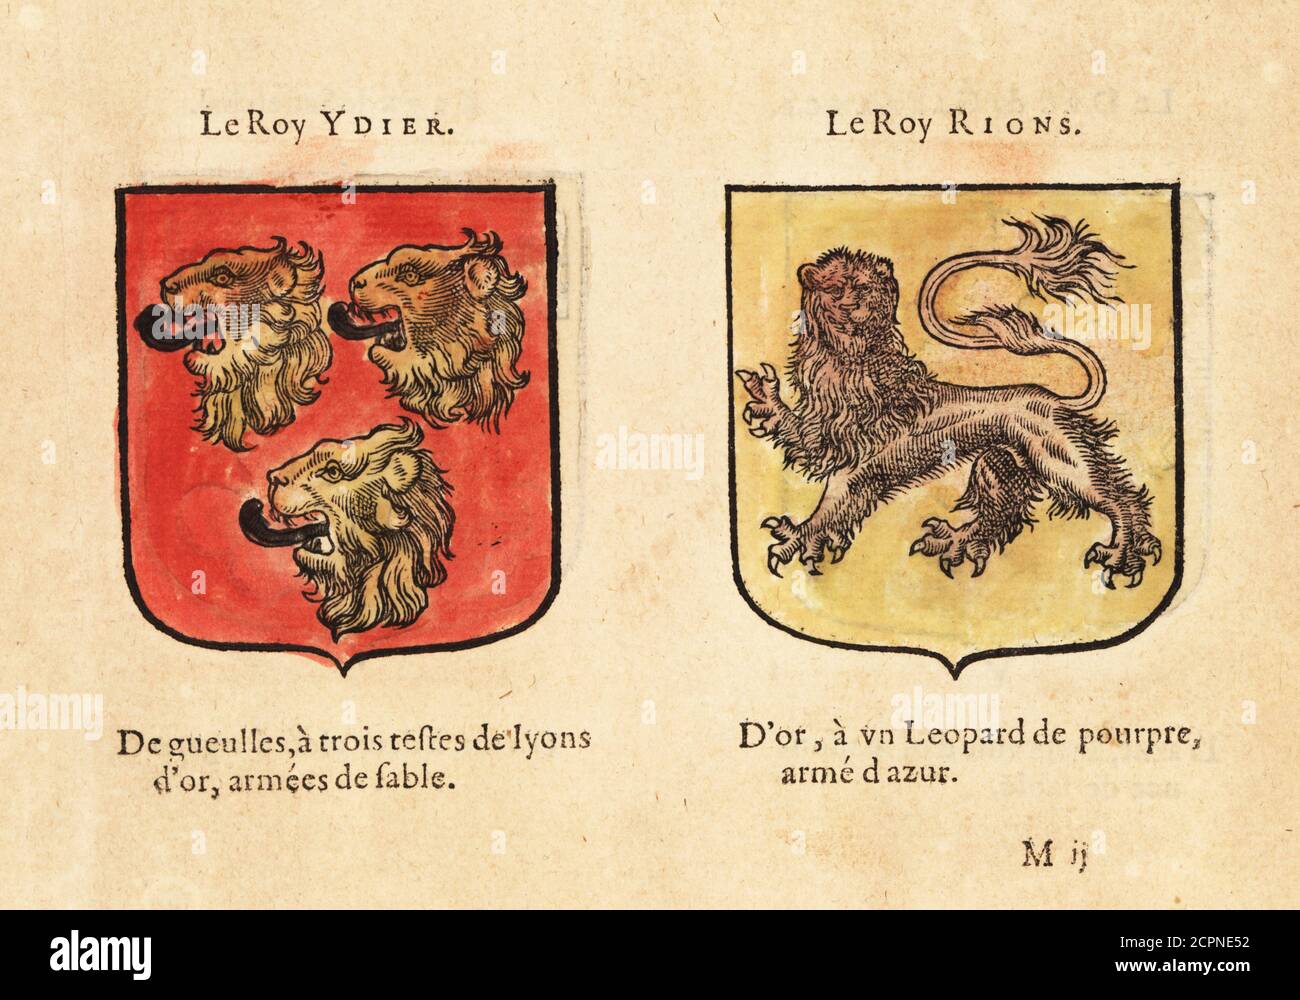 Imaginary coats of arms of King Arthur’s Knights of the Round Table: Edern ap Nudd with three lion heads and King Rience with purple leopard. Chevaliers de la table ronde: Le Roy YDIER, Le Roy RIONS. Handcoloured woodblock engraving from Hierosme de Bara’s Le Blason des Armoiries, Chez Rolet Boutonne, Paris, 1628 Stock Photo